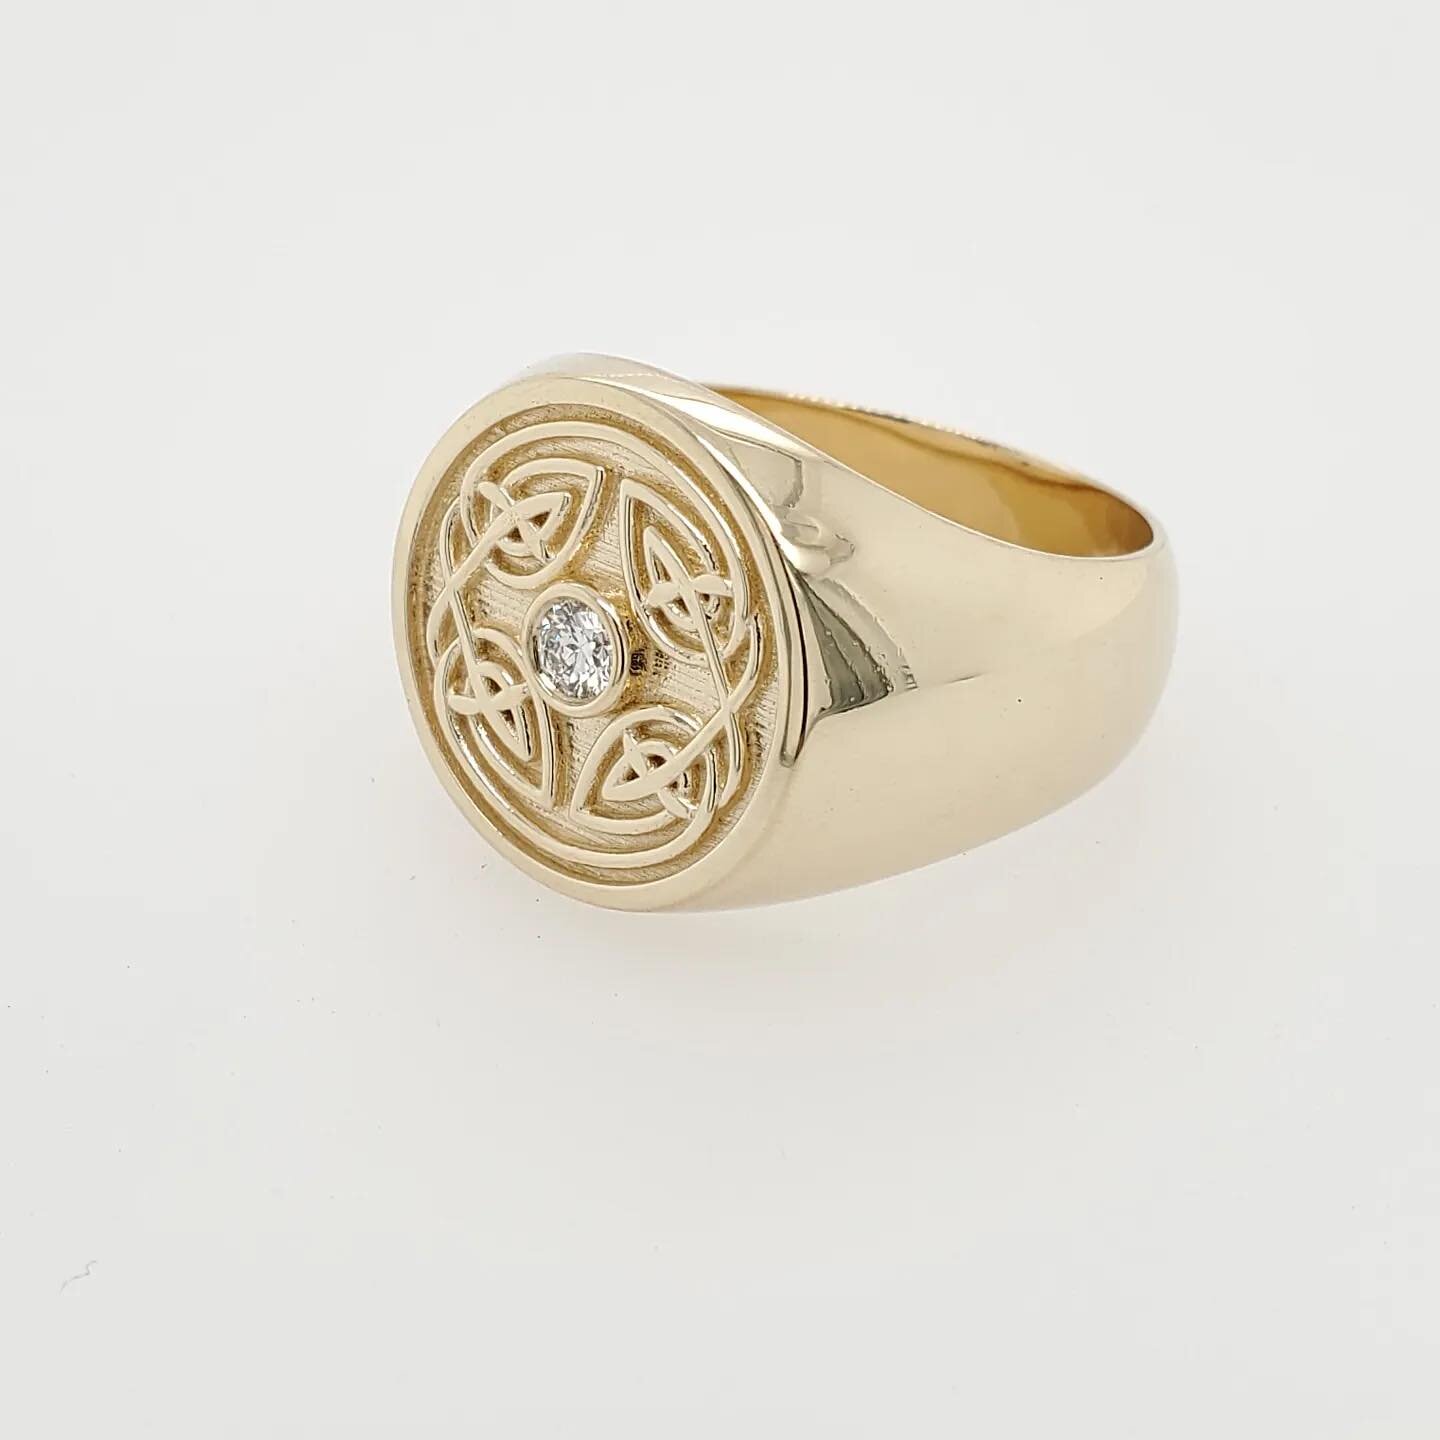 Here at H Tim Williams we do custom Celtic jewelry. Bring us your ideas and we will create a unique piece for you!👑✨
.
.
.
#HTimWilliams #Smallbusiness #Familyowned #Sandiegojeweler #Custom #Shoplocal #Timeless #Handcrafted #Jewelrylover #Highjewerl